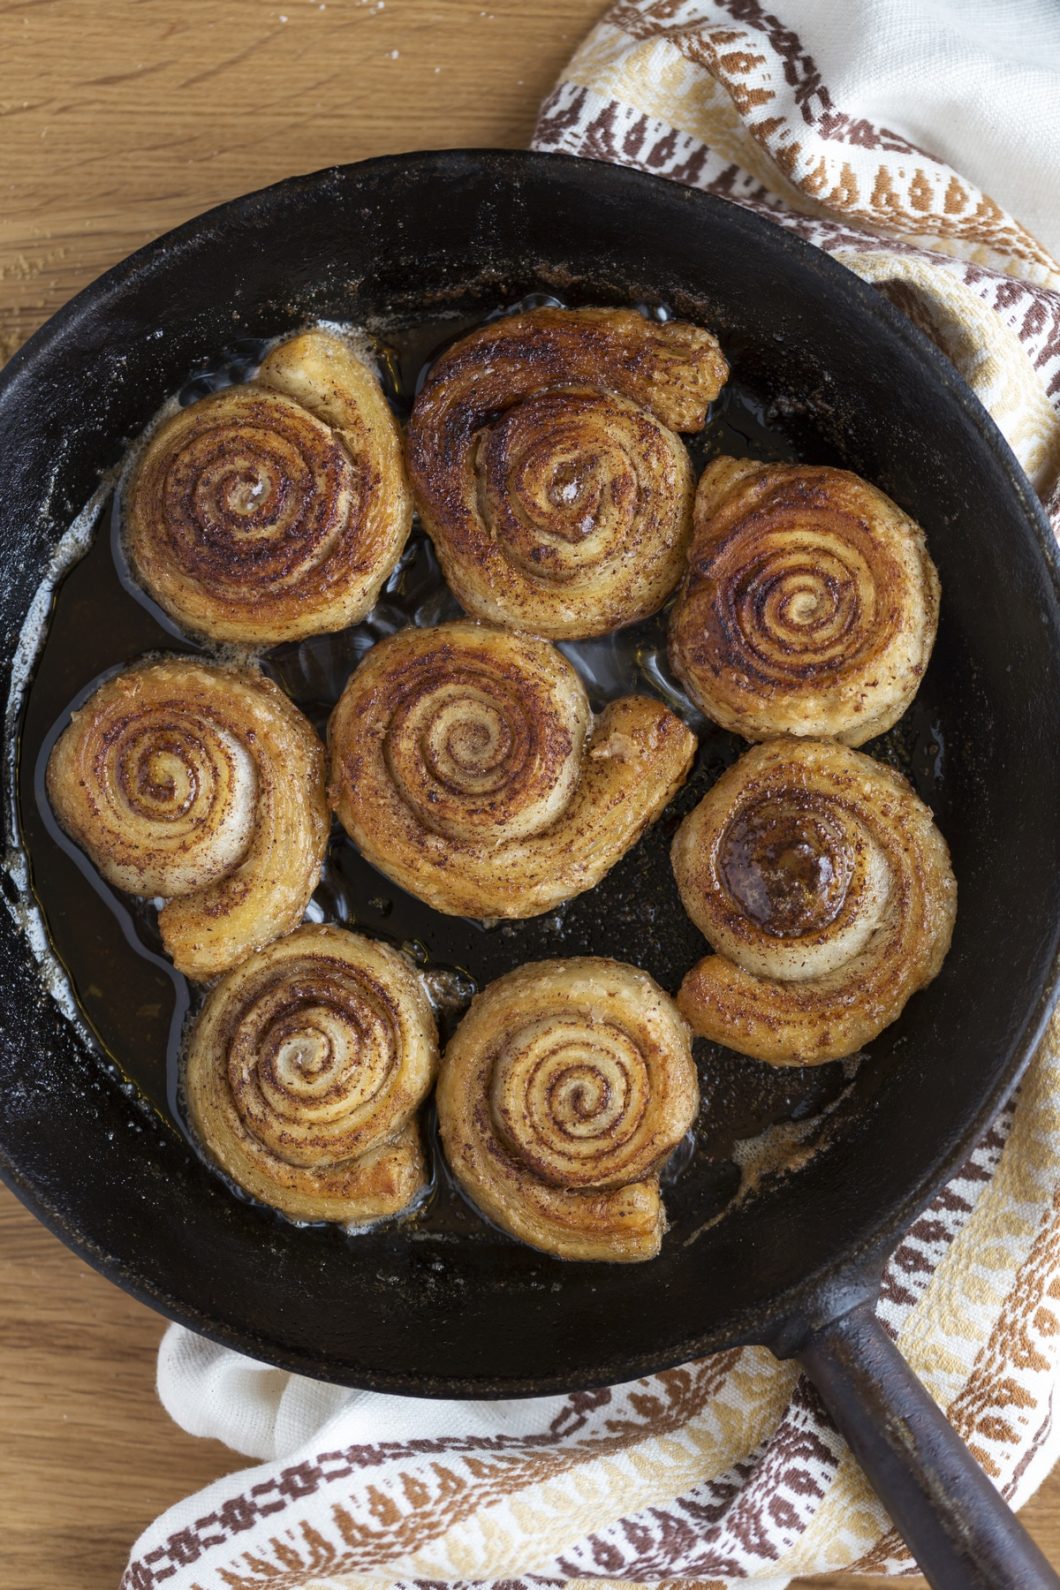 Skillet cinnamon rolls with puff pastry made on the stovetop.